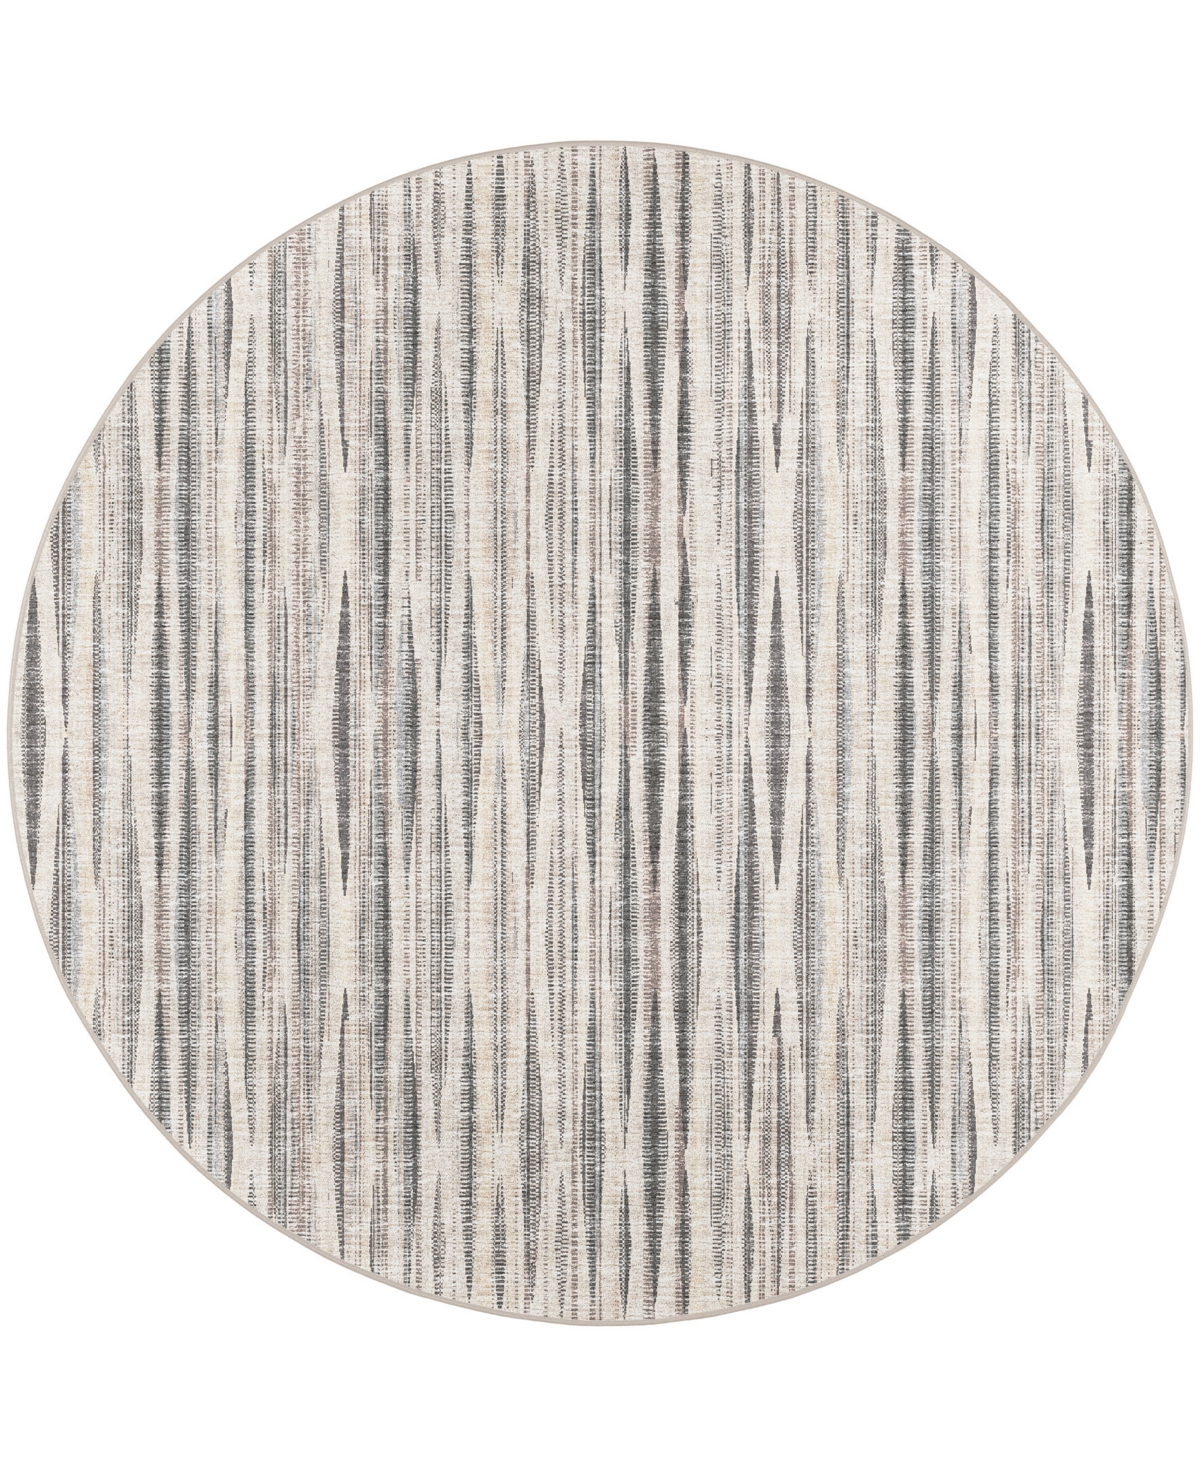 D Style Sutter Stt-1 10' X 10' Round Area Rug In Ivory